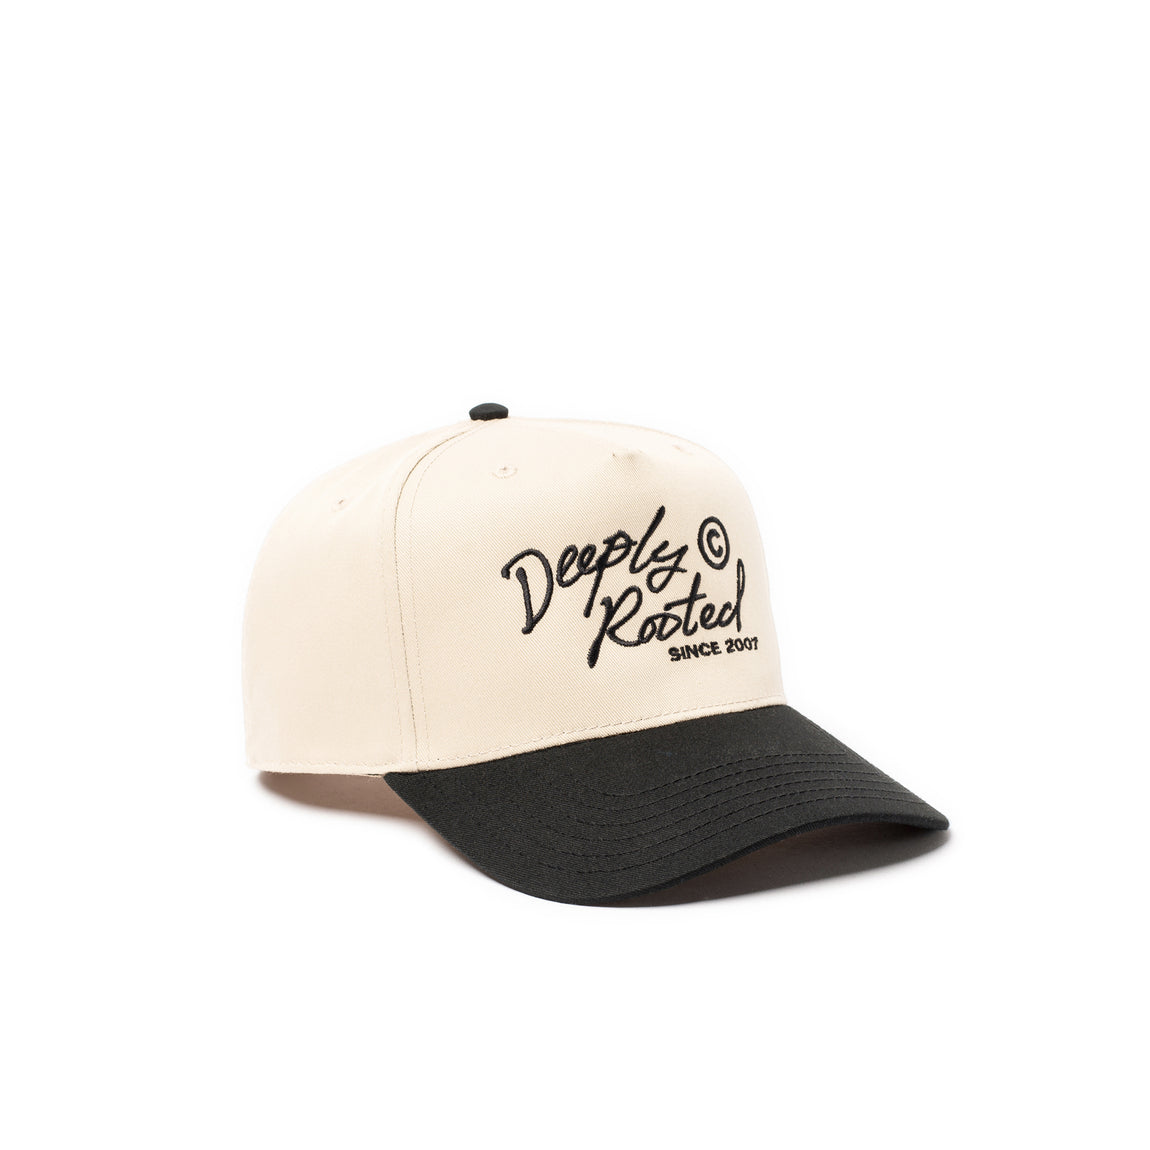 Centre Deeply Rooted Snapback Hat (Natural/Black) - Centre Deeply Rooted Snapback Hat (Natural/Black) - 